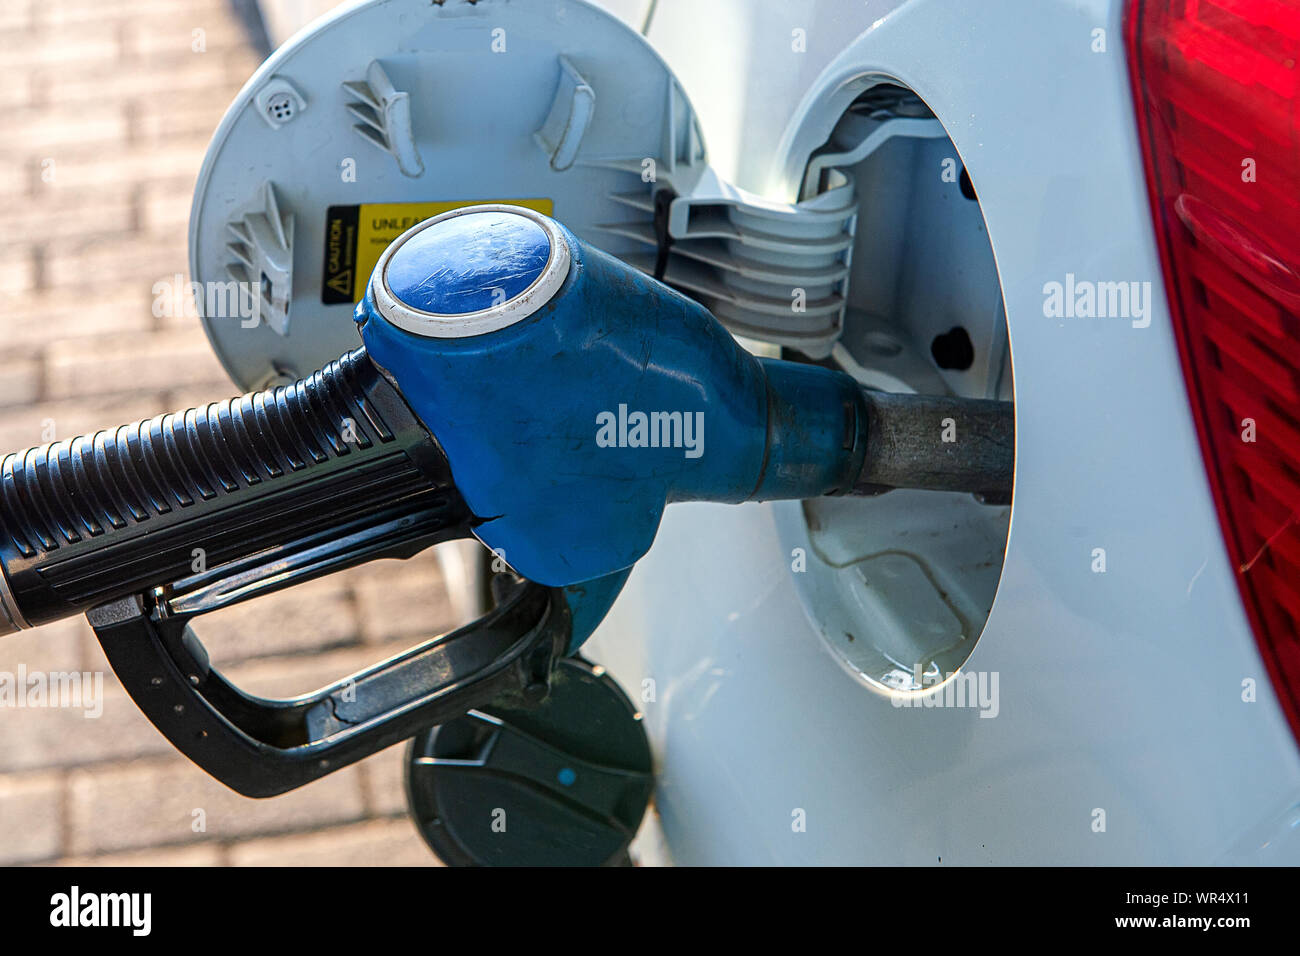 A gun for filling gasoline is inserted into the gas tank of the car. Holding fuel nozzle to refuel gasoline for car Stock Photo